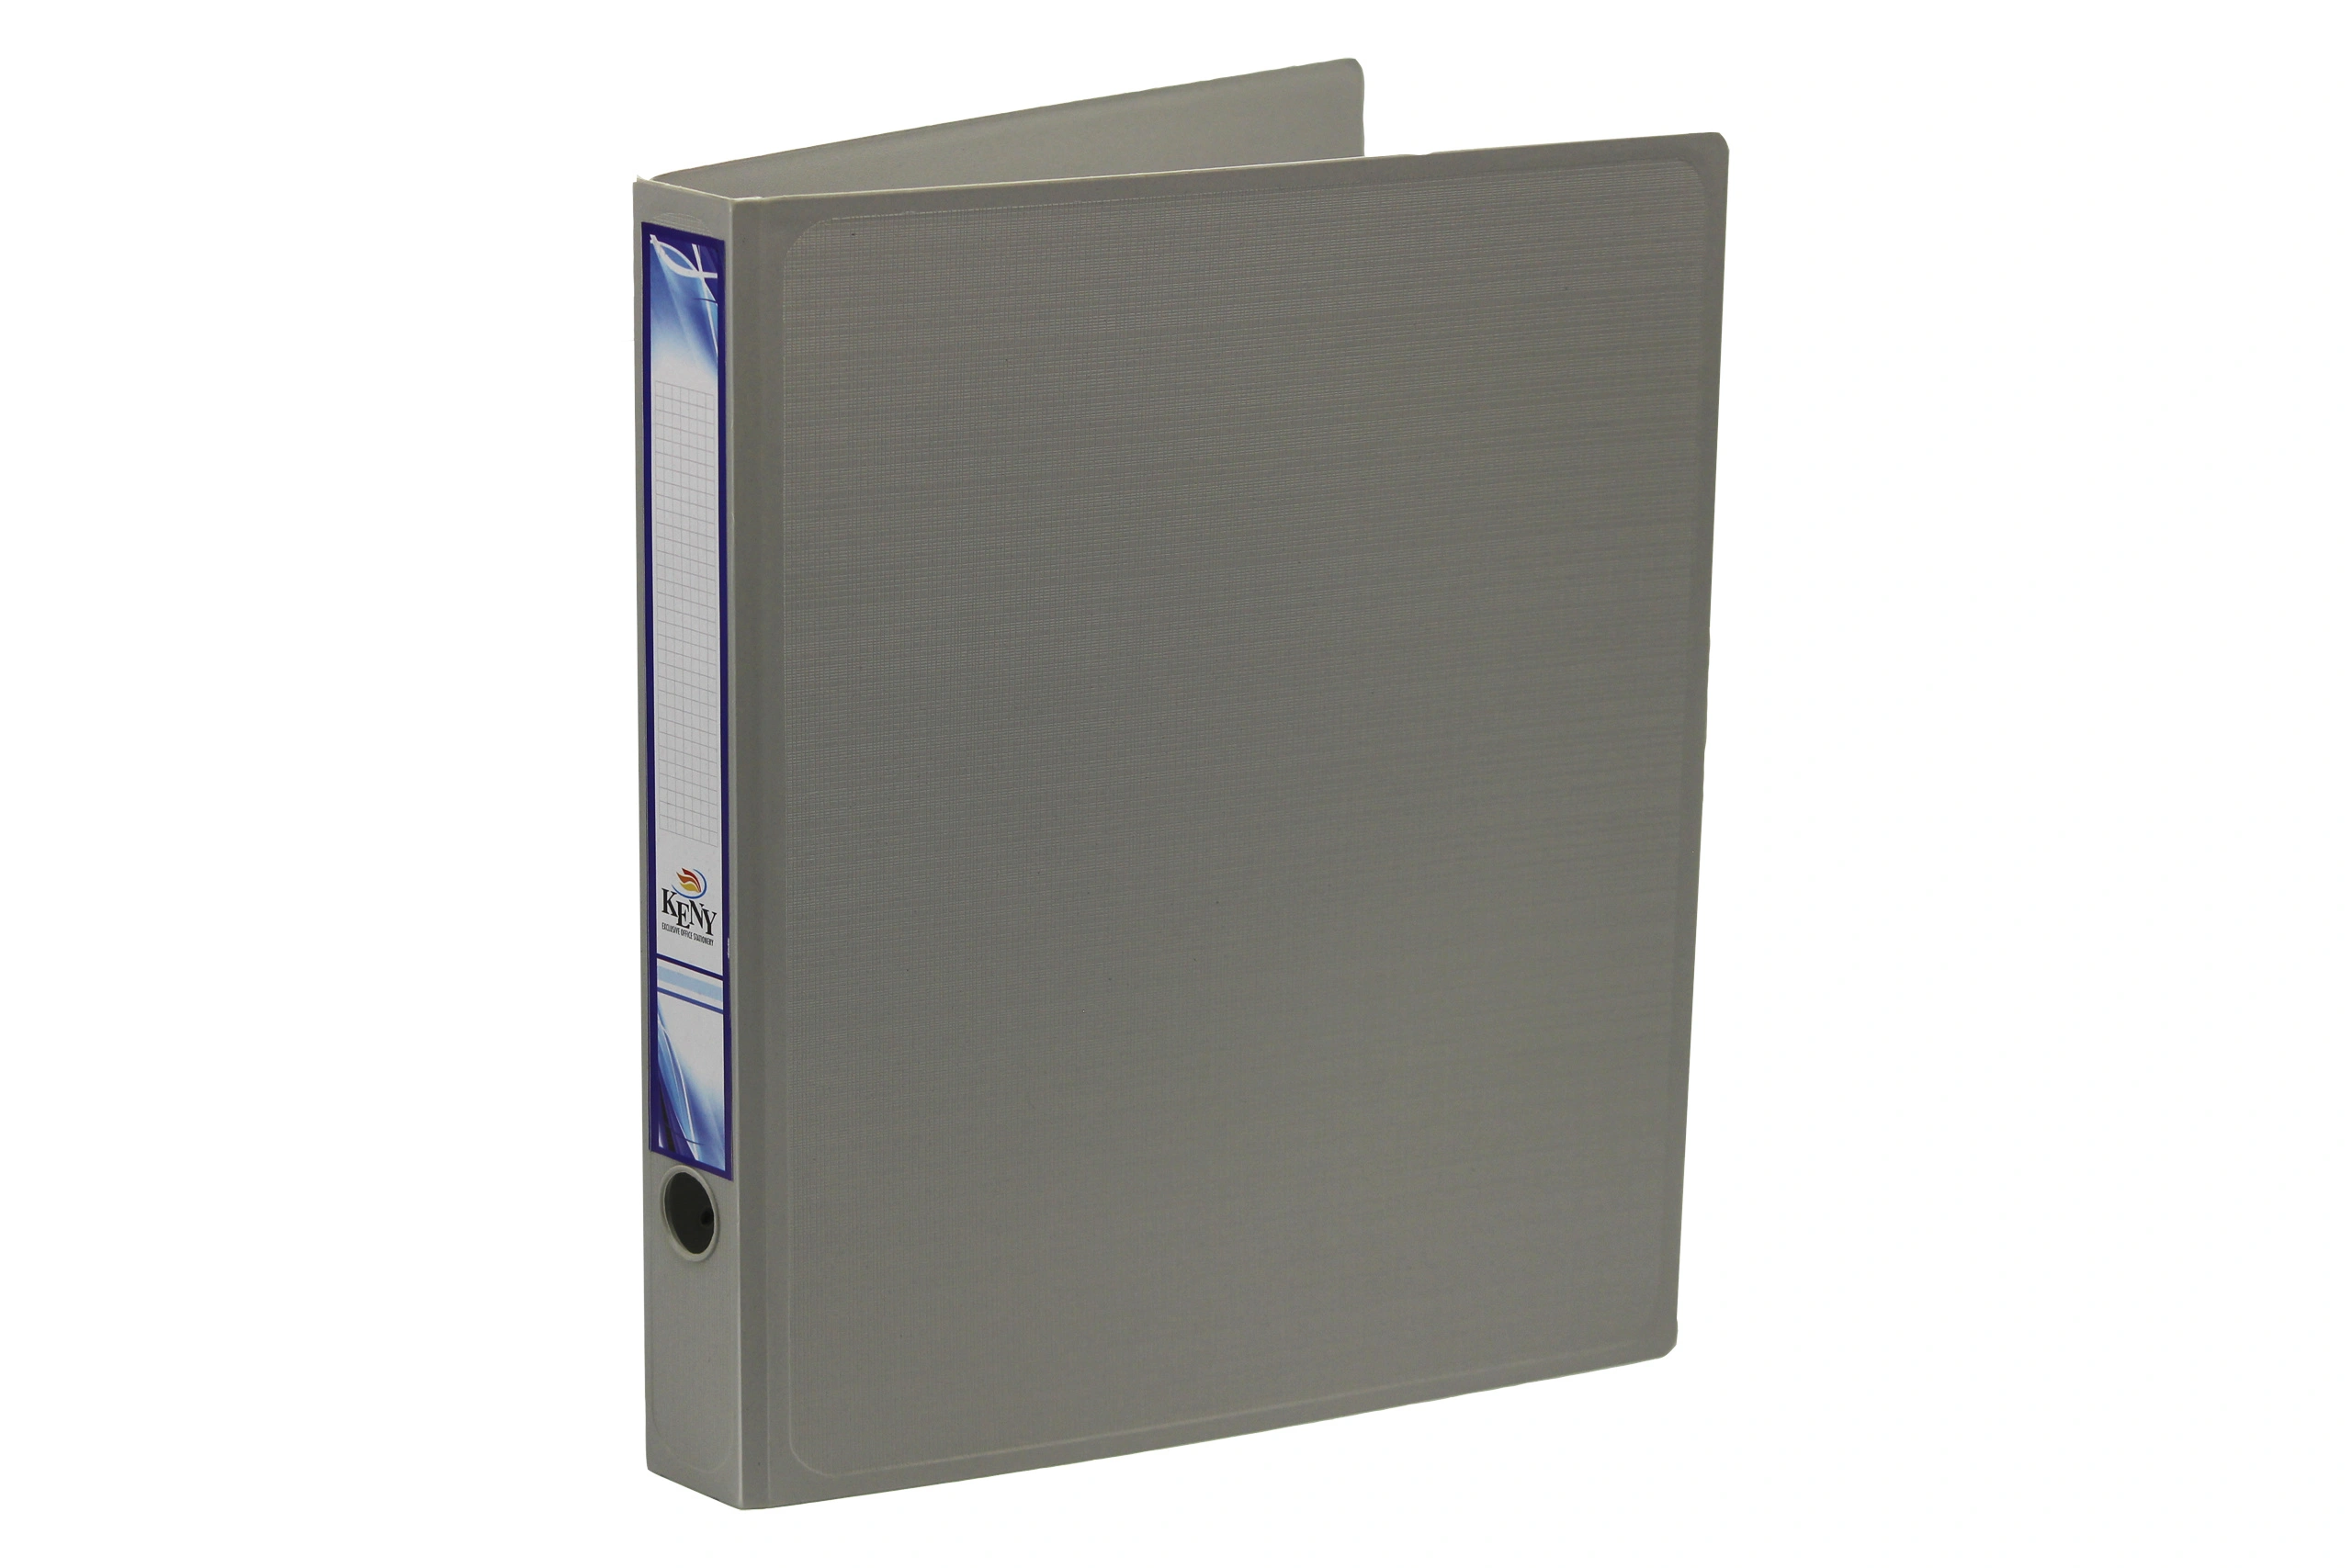 Keny Ring Binder | Moulded Binder | Best for A4 Size Papers | 2D Shaped 25mm Rings | D Ring Clip |  (843A-2D)-843A2DGREY